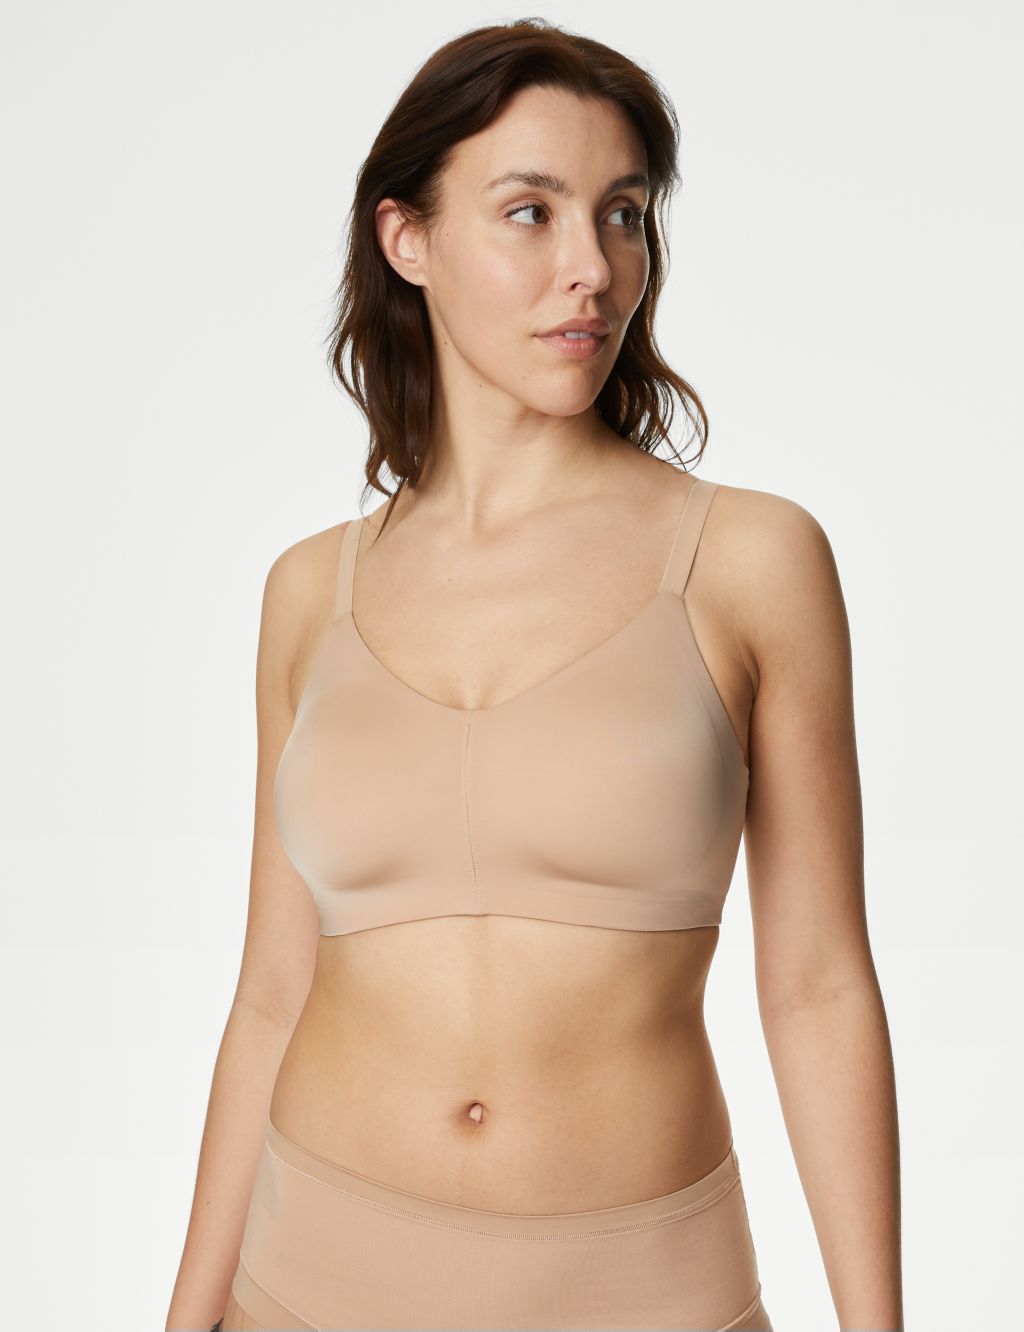 Flexifit™ Non-Wired Full Cup Bra F-H image 1